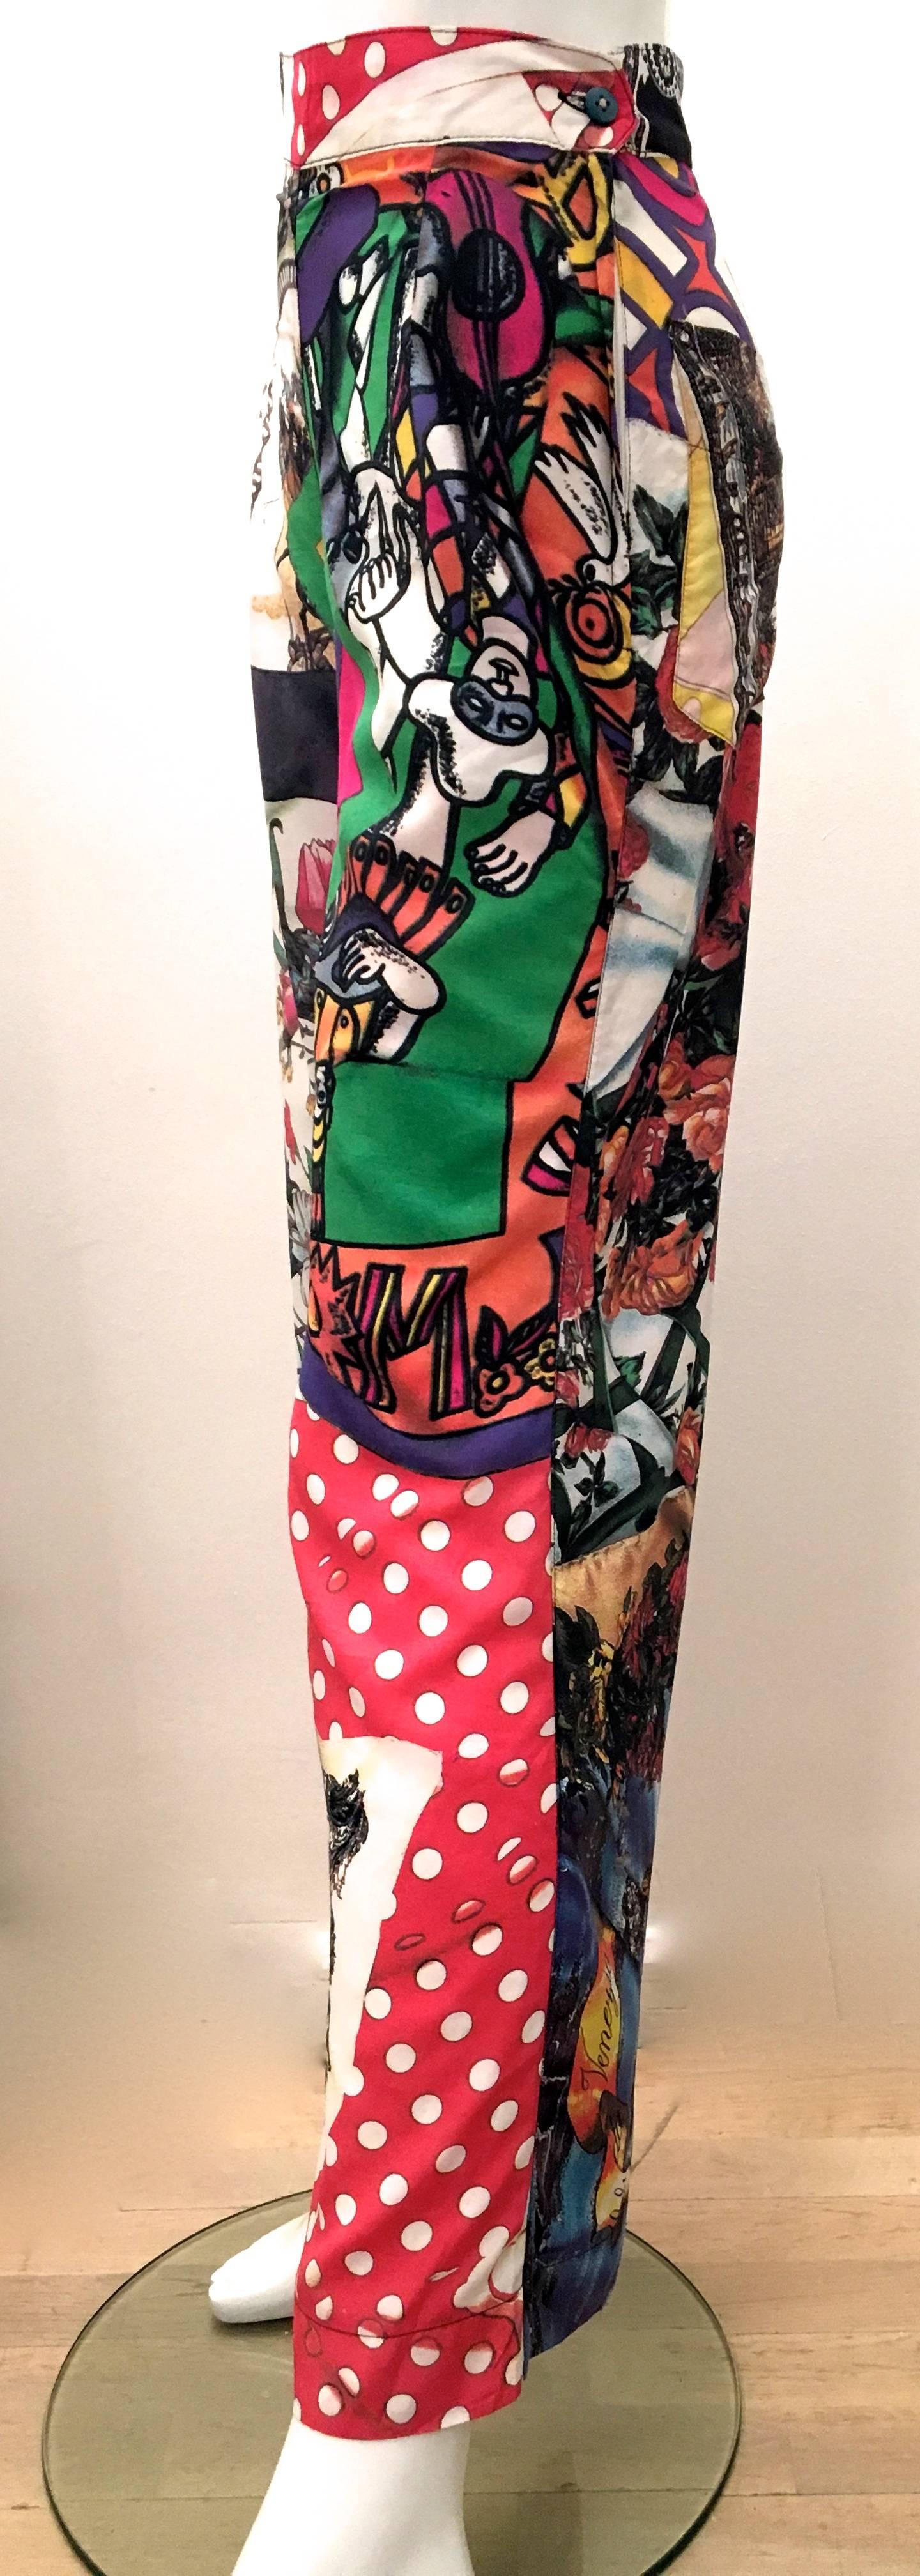 Presented here are a pair of Moschino Mod Pants from the early 1990’s. These pants lightheartedly reference various high end fashion labels in a fun and comical way. They definitely make a statement and are sure to be a conversation starter at your